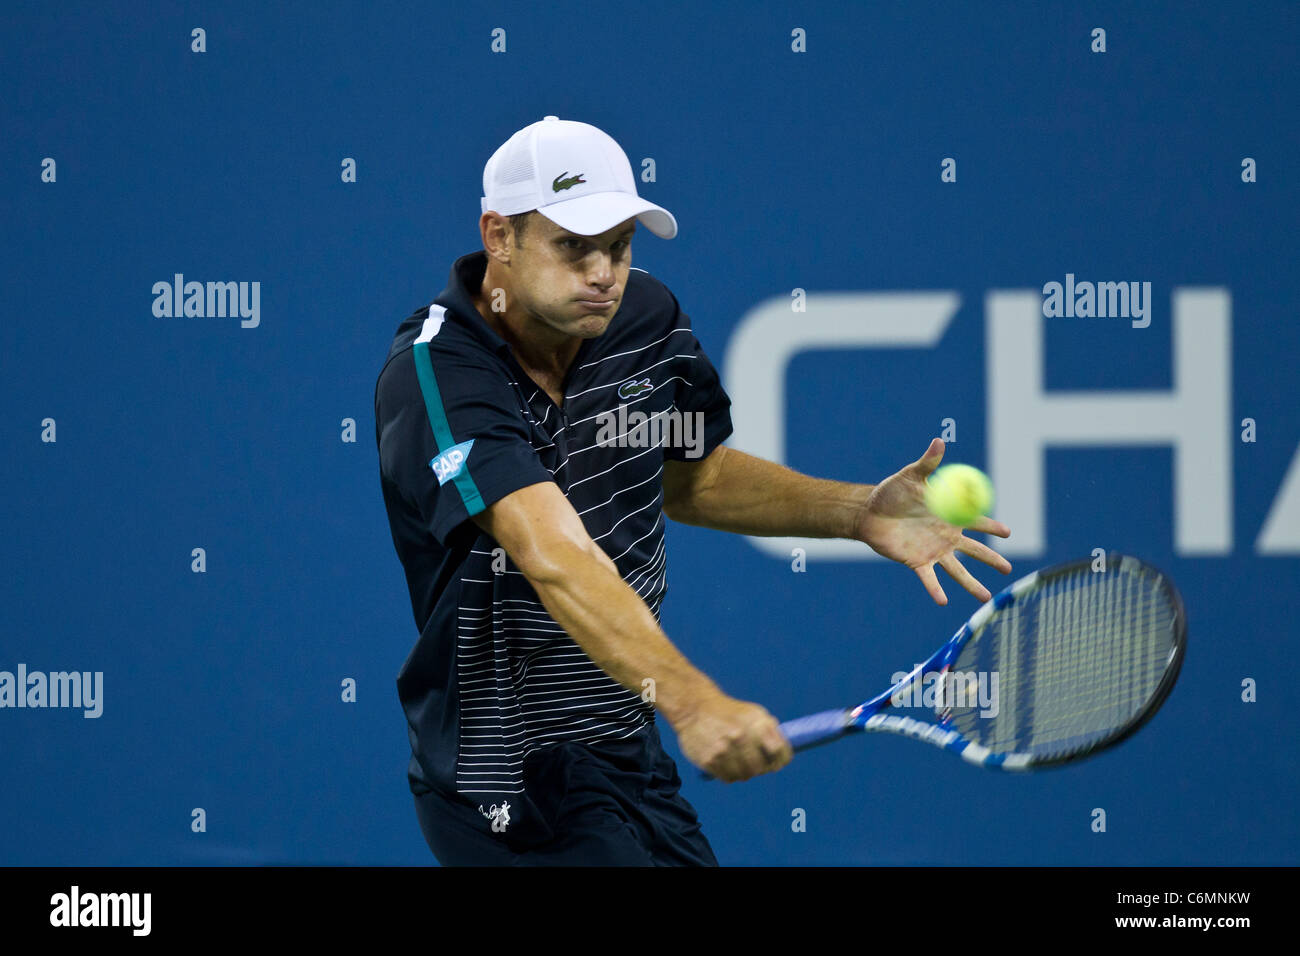 Andy Roddick (USA) competing at the 2011 US Open Tennis. Stock Photo